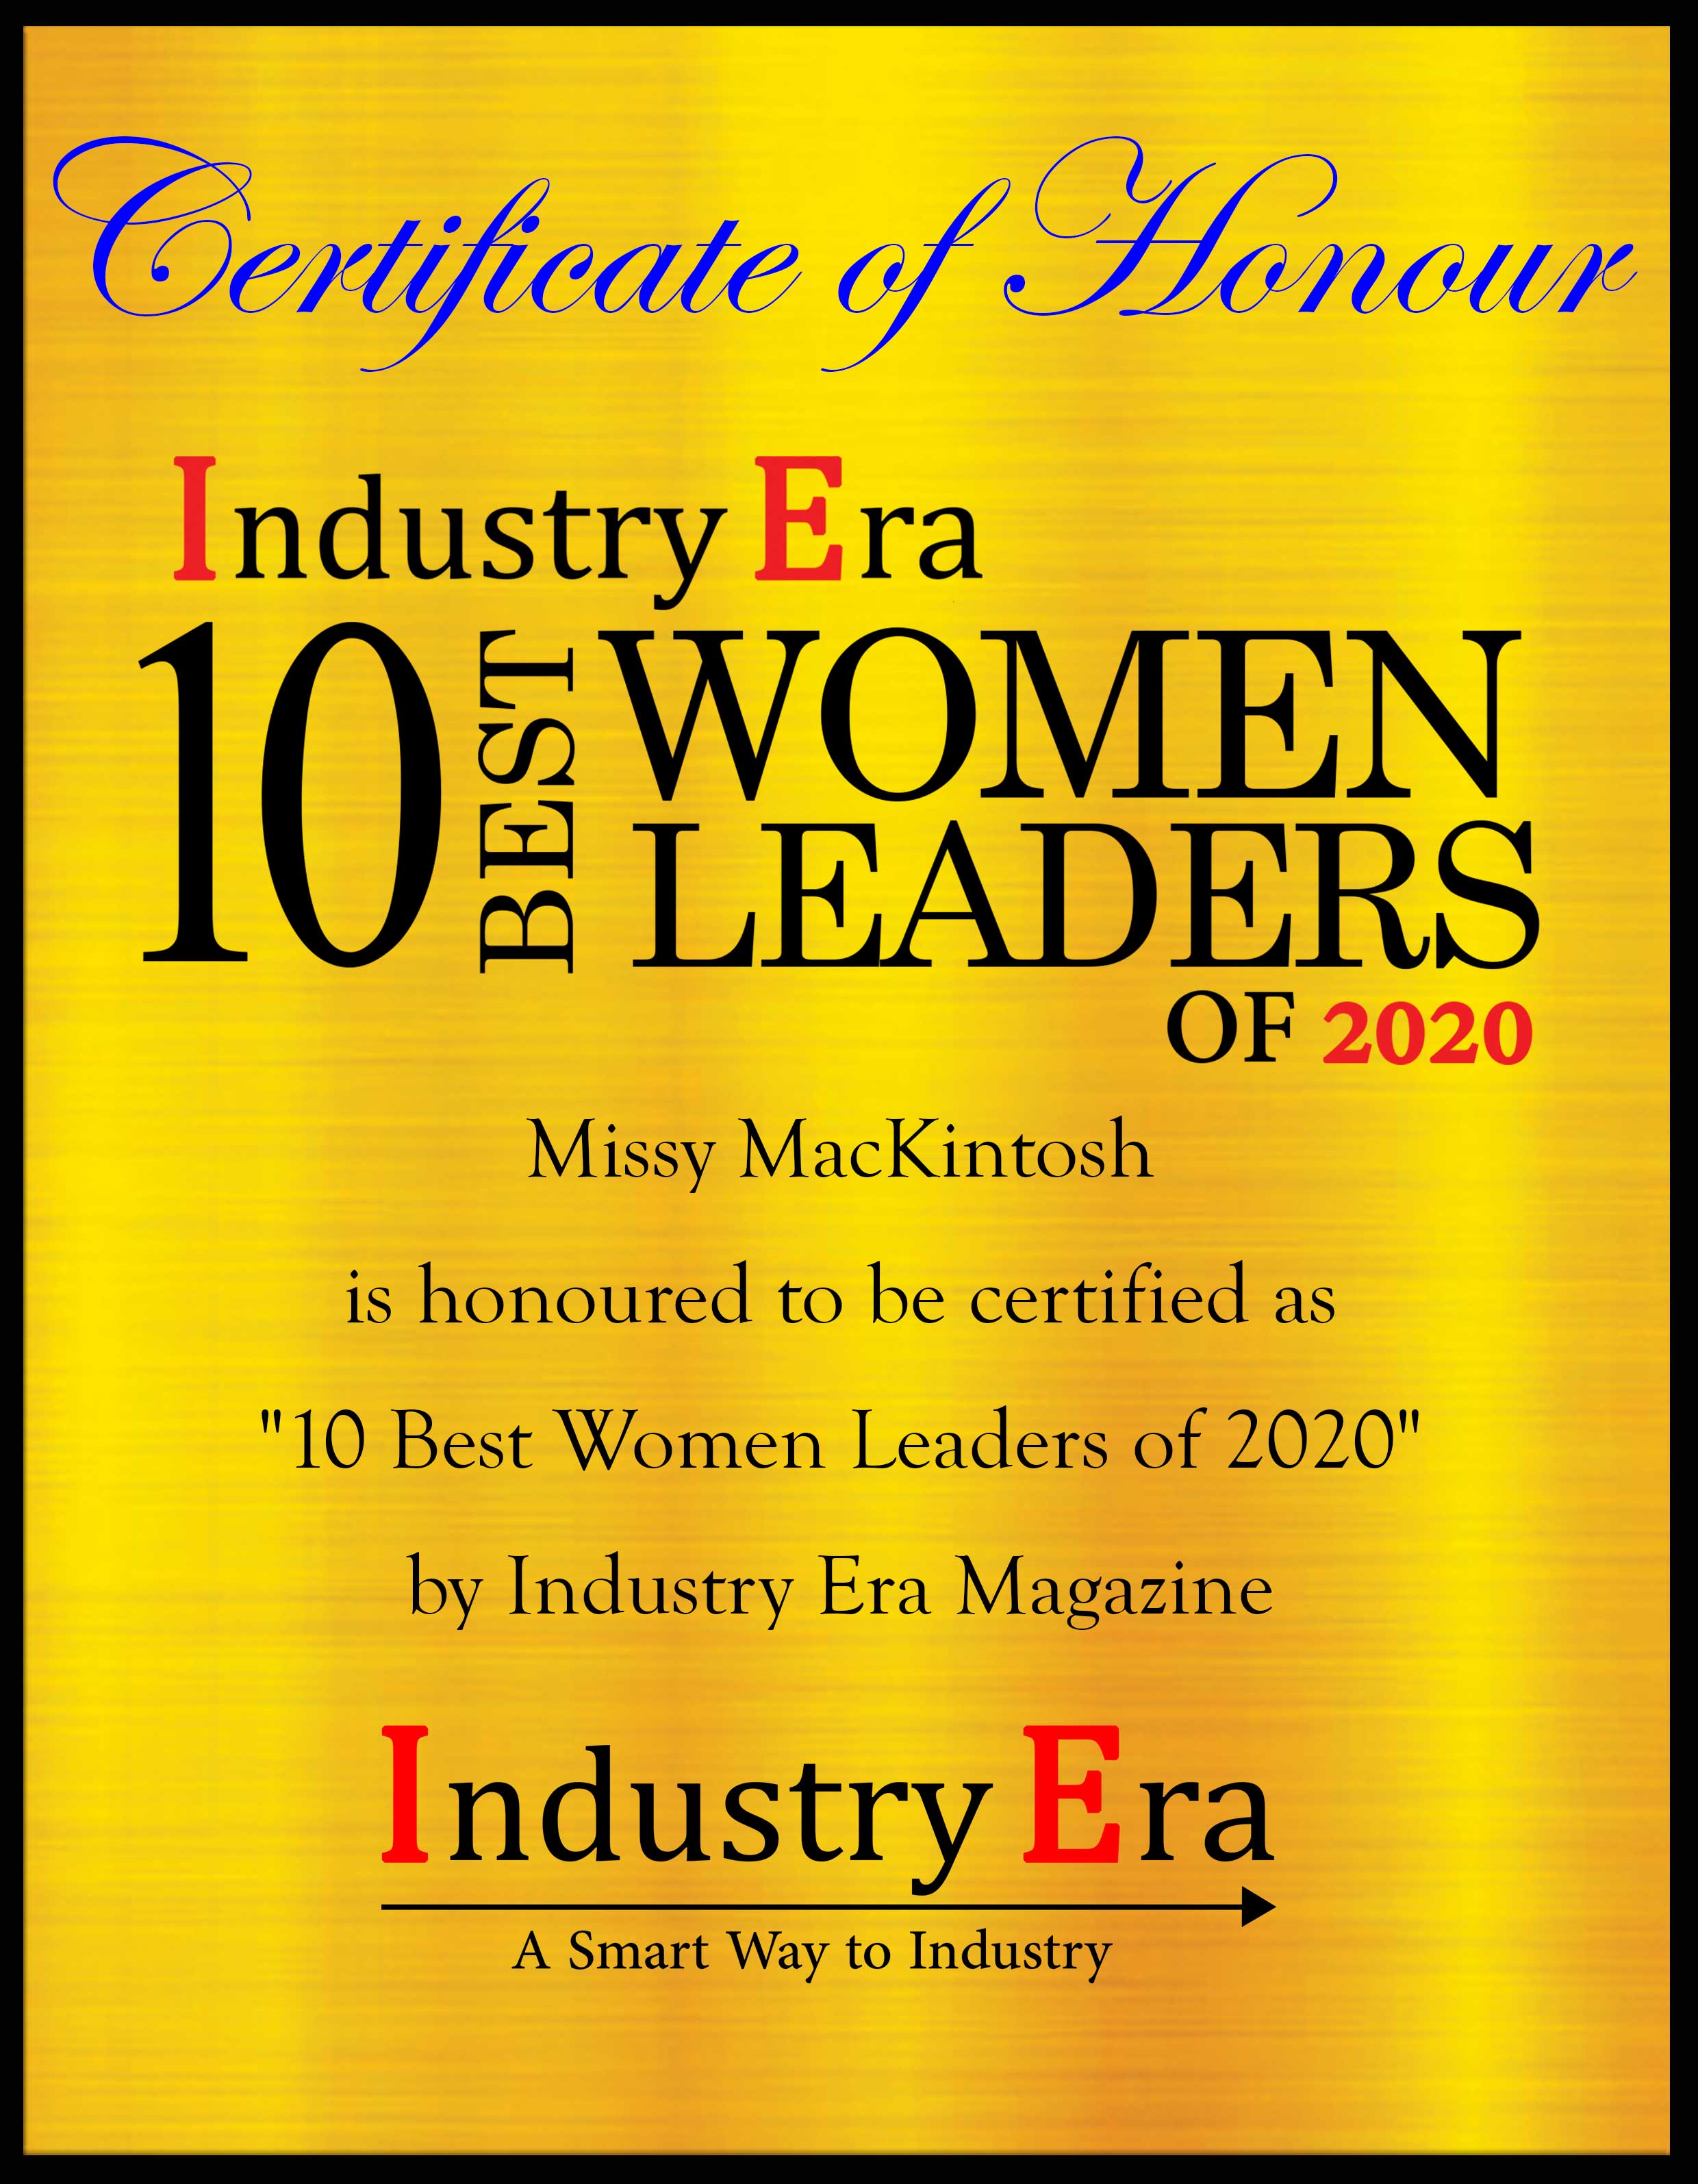 Missy MacKintosh, founder and CEO of MisMacK Clean Cosmetics Certificate